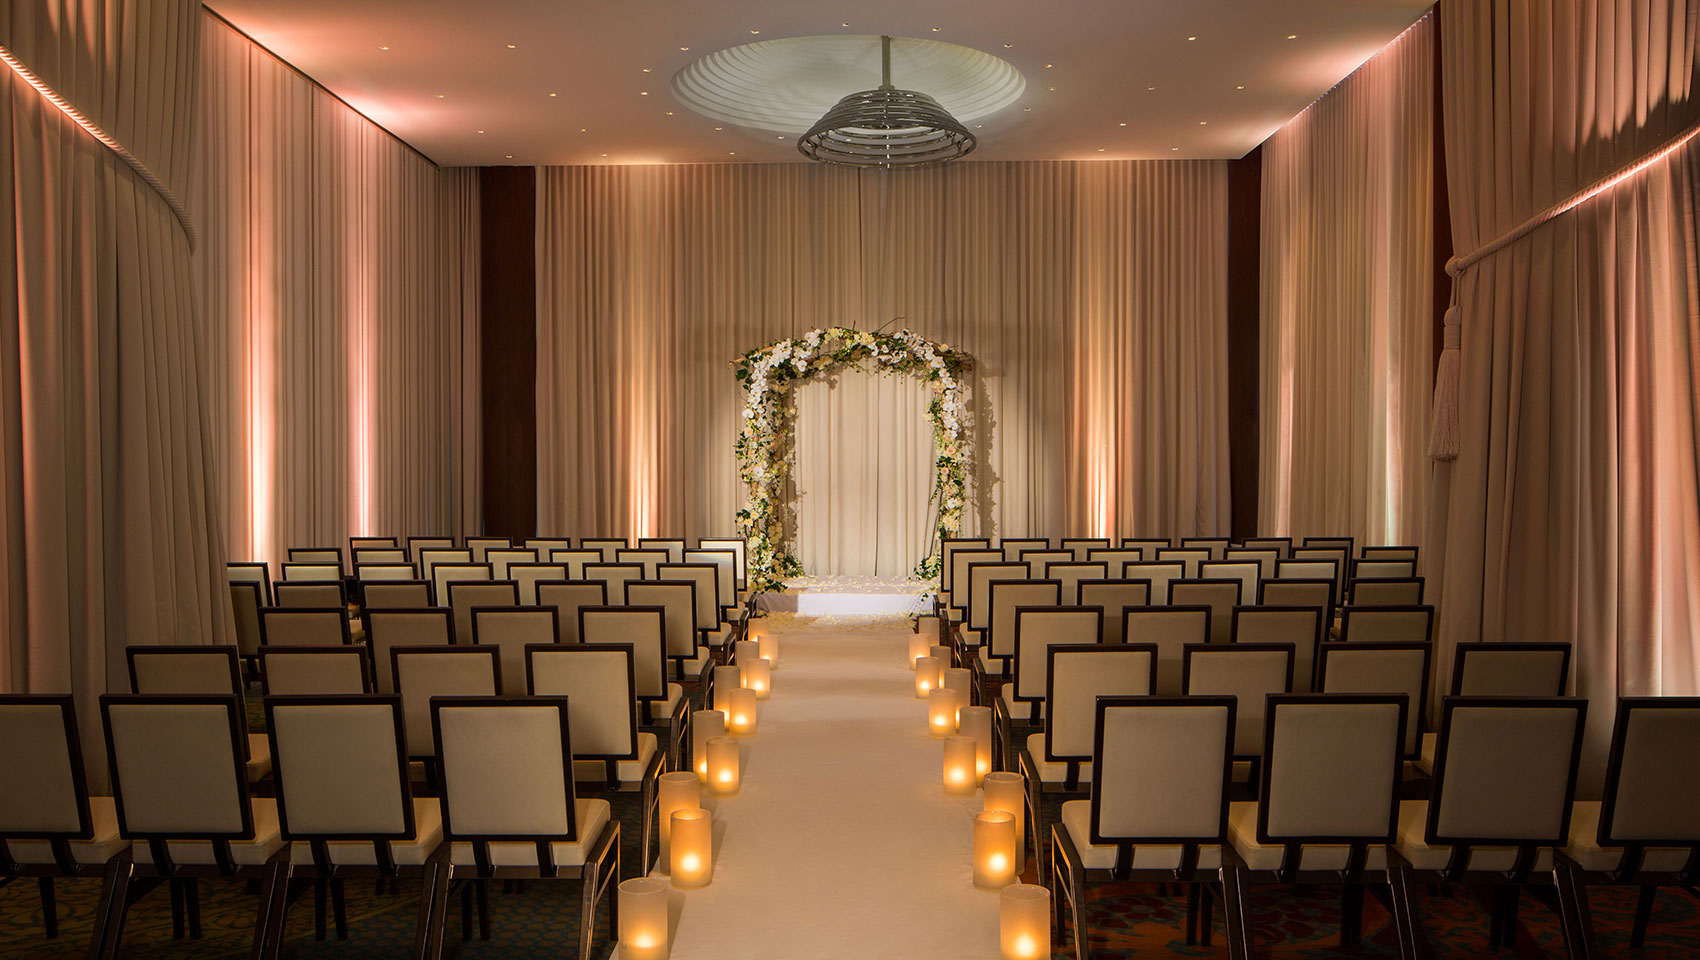 Ventana I wedding set up with chairs facing altar in room with curtains and high ceilings 